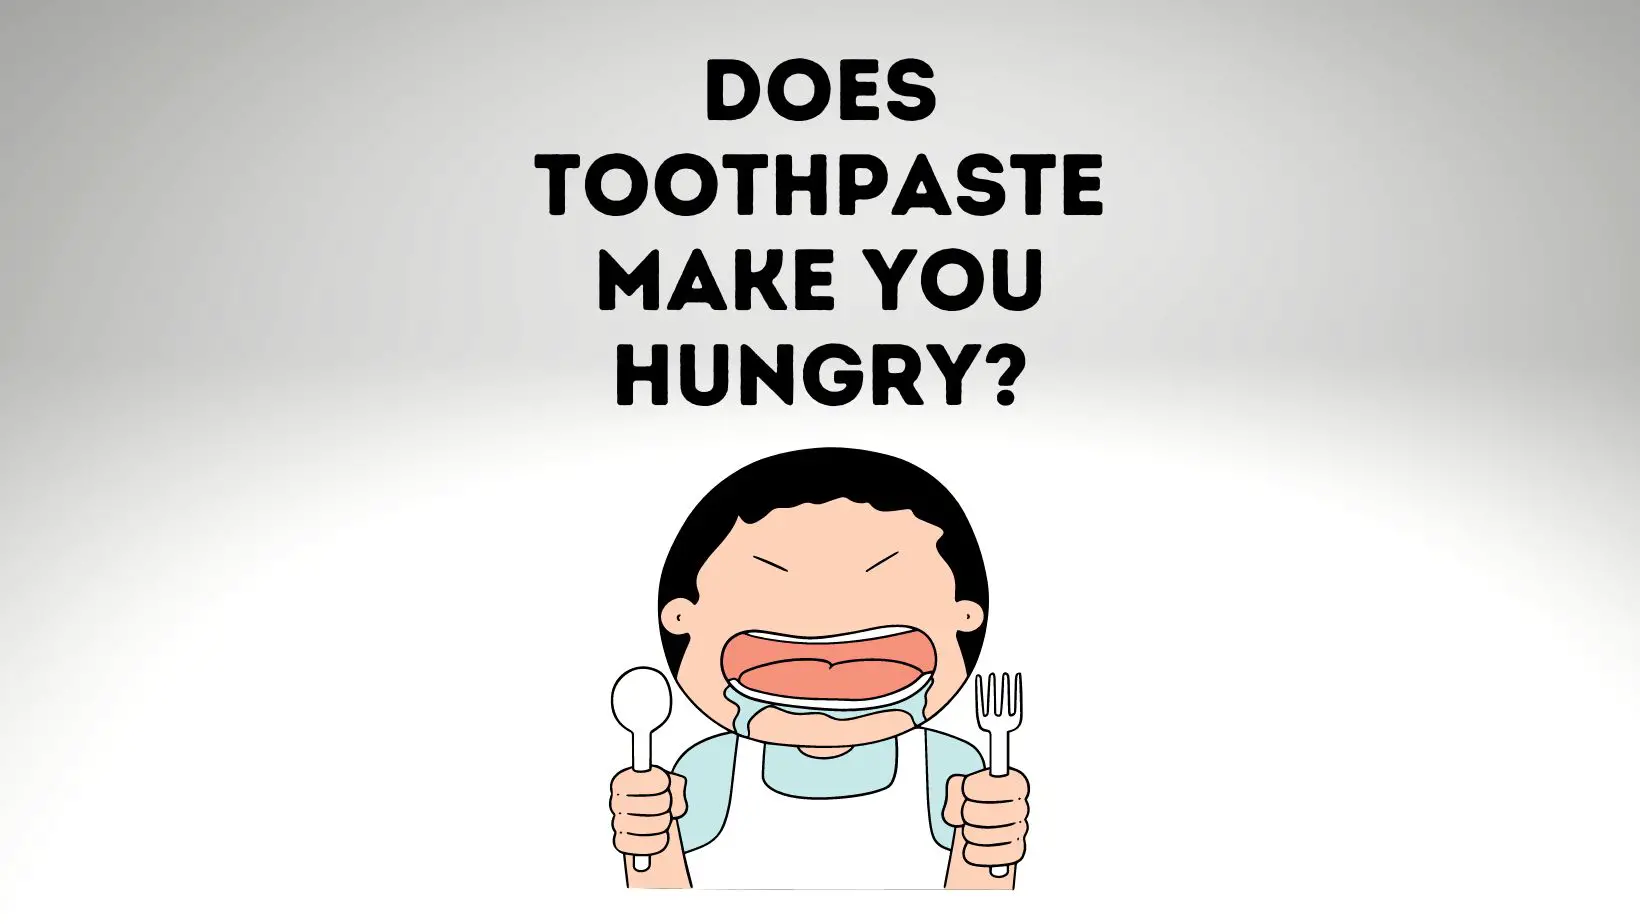 Does Toothpaste Make You Hungry?